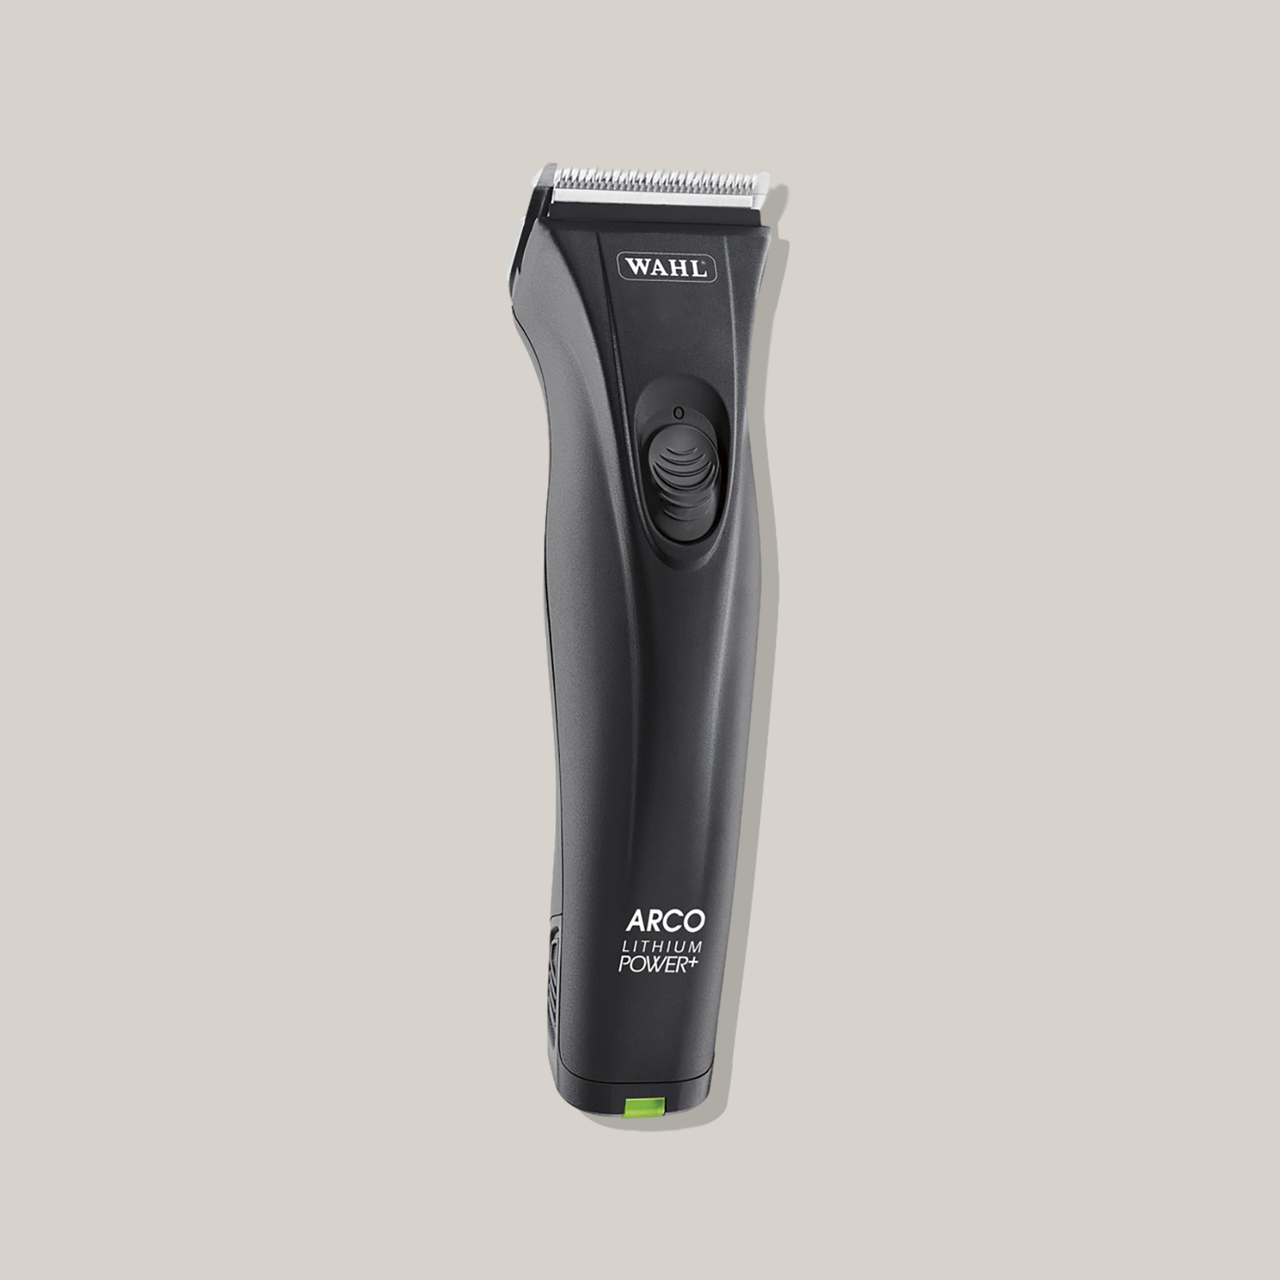 Wahl Arco lithium cordless clipper #56457 